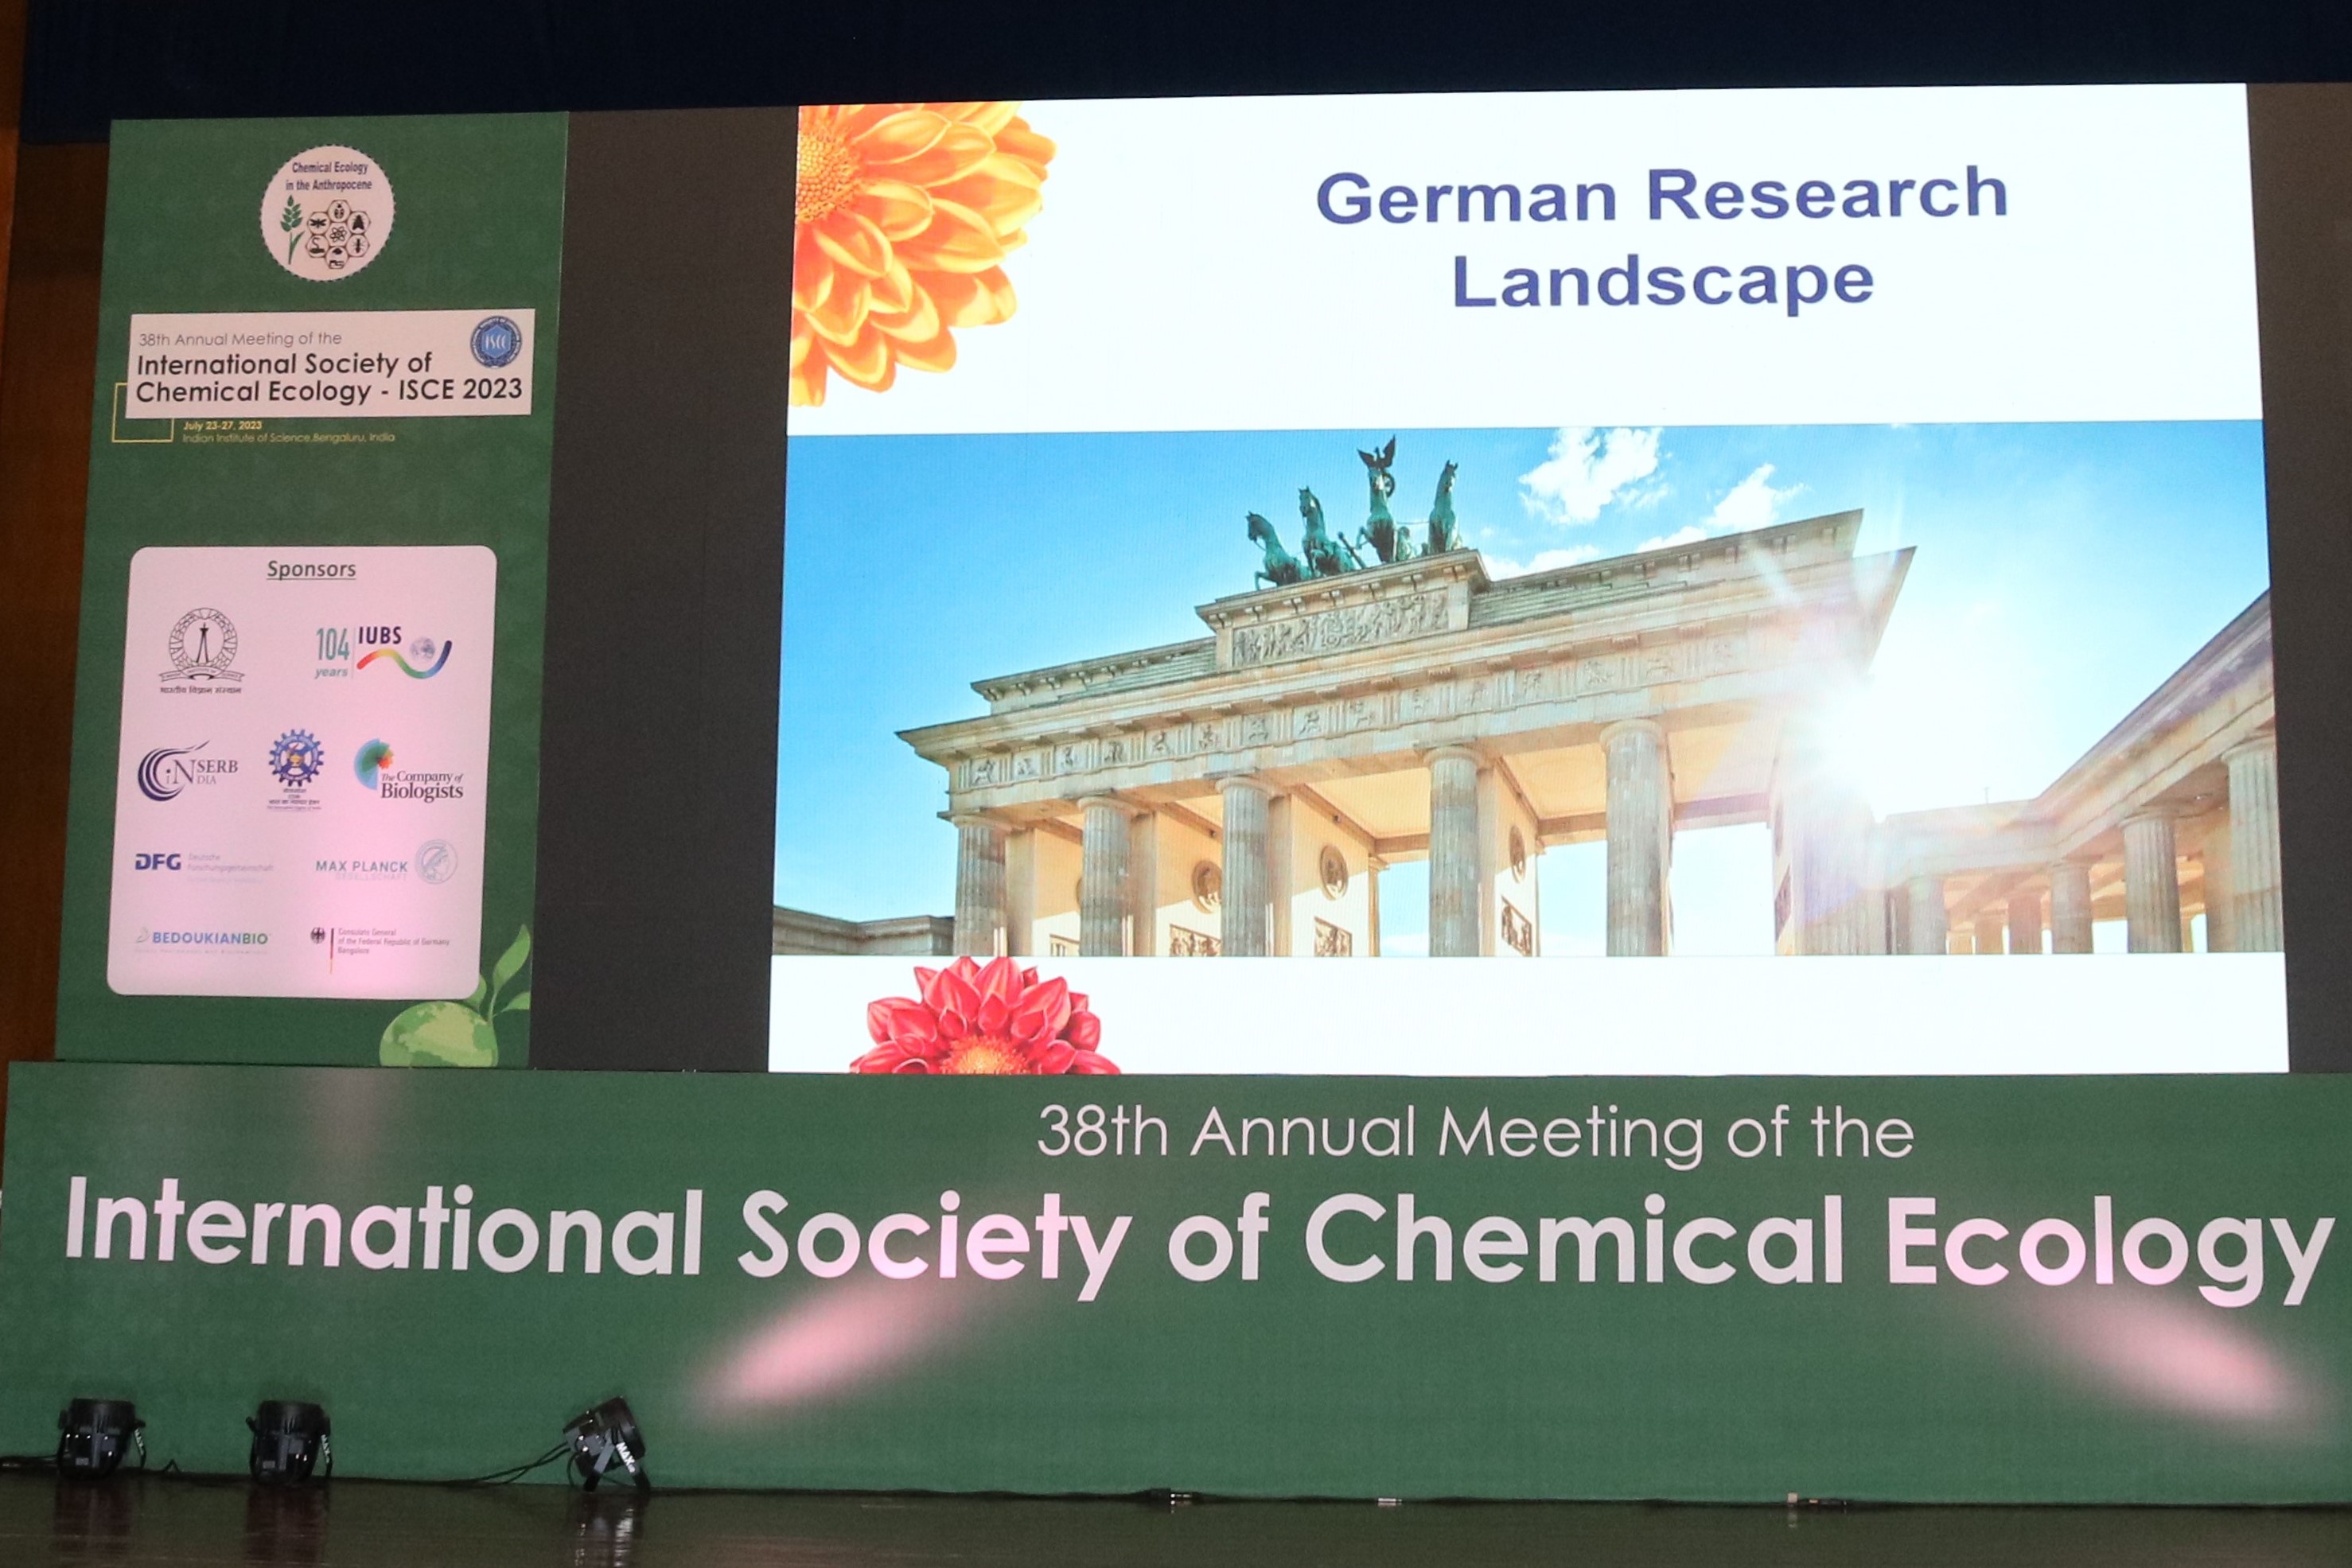 Annual Meeting of the International Society of Chemical Ecology